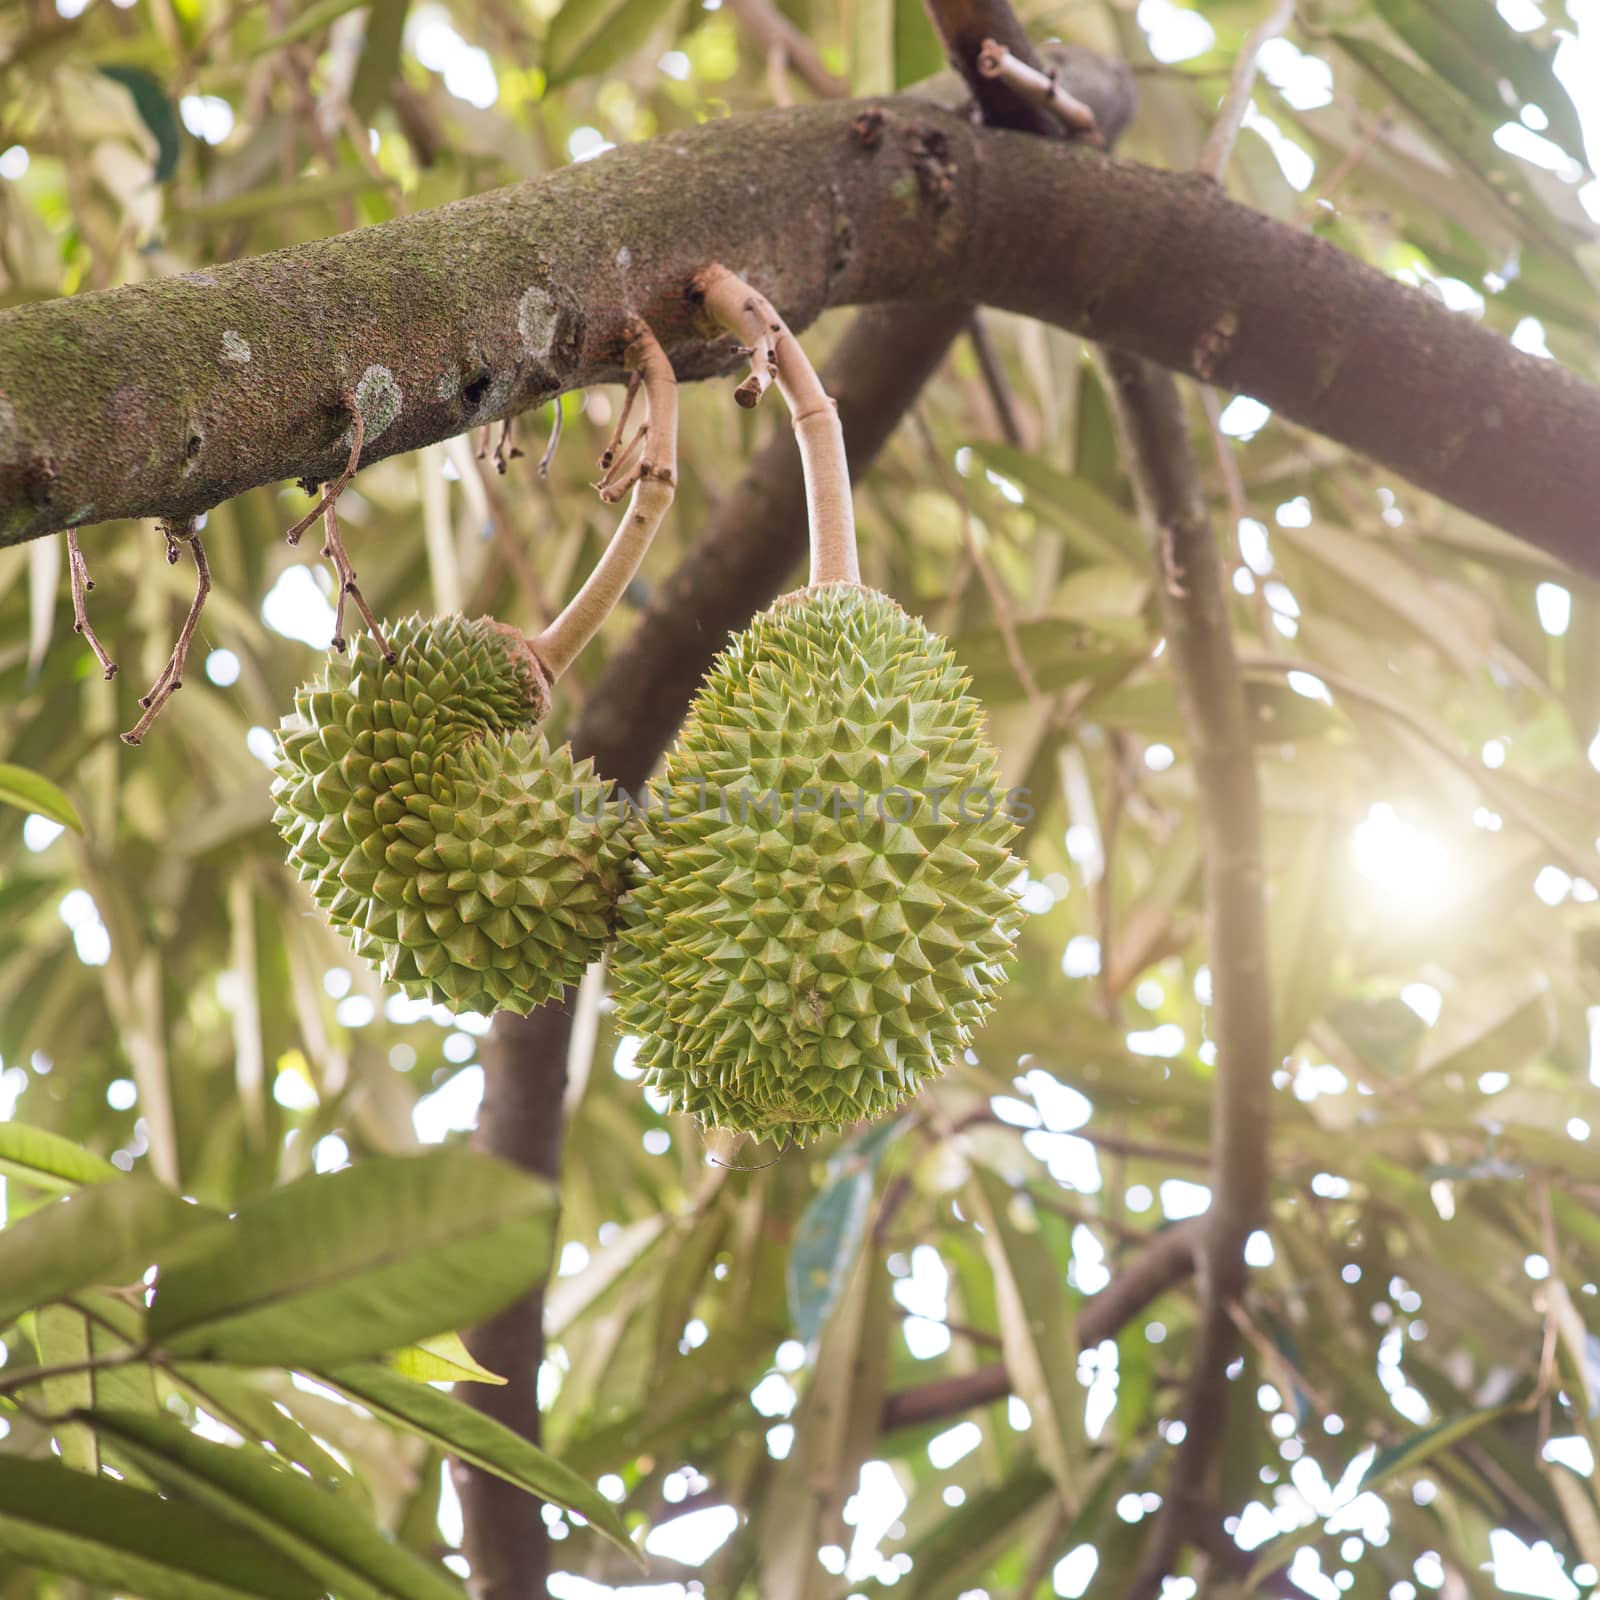 Musang king durian tree in orchard. by szefei